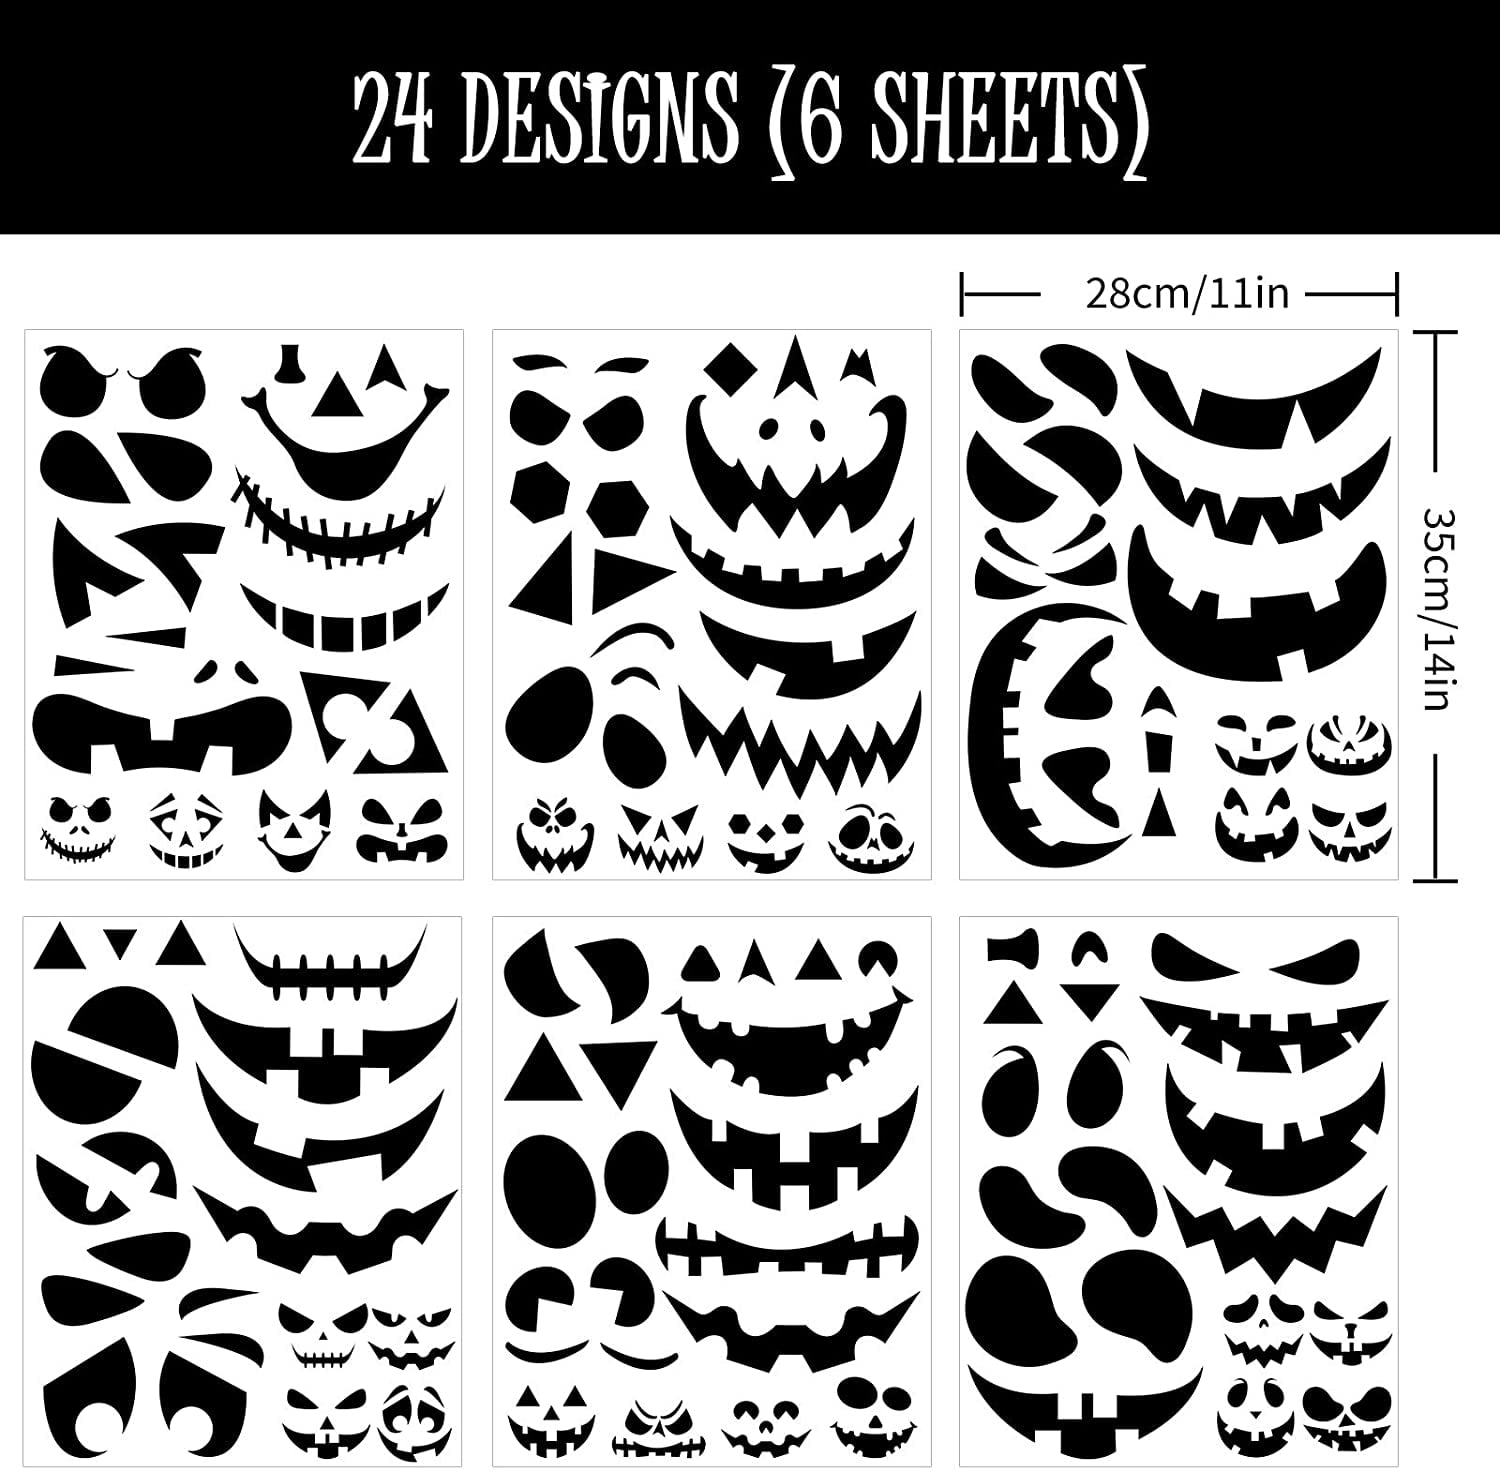 Make Your Own Jack-O-Lantern Face Decals for Halloween Party Decoration KIDPAR 82Pcs Halloween Pumpkin Stickers 33 Funny and Classic Pumpkin Expressions Stickers for Pumpkins and Squashes 